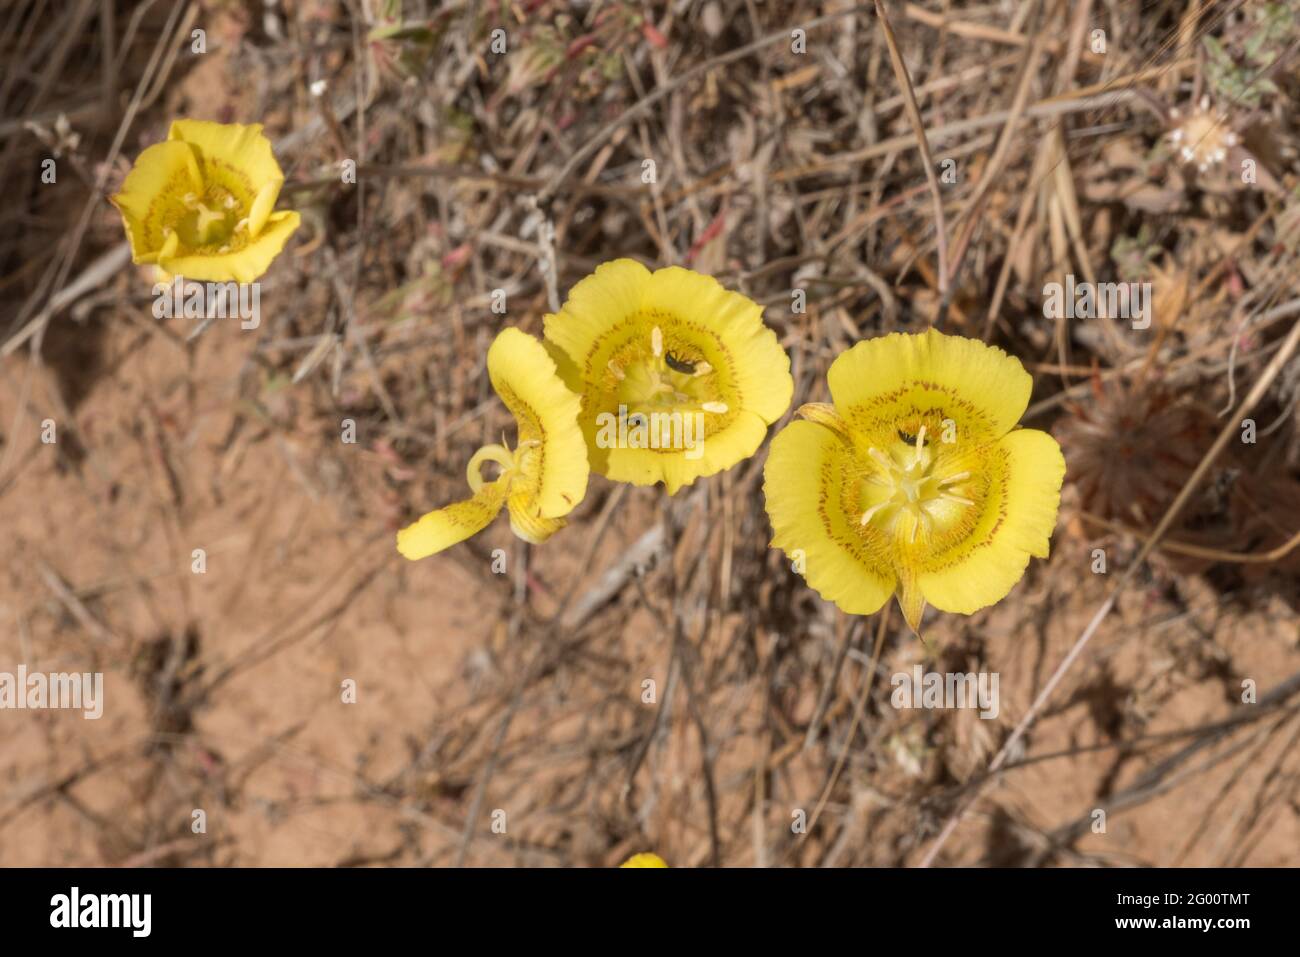 The yellow mariposa lily (Calochortus luteus) a colorful and vibrant California flower. Stock Photo